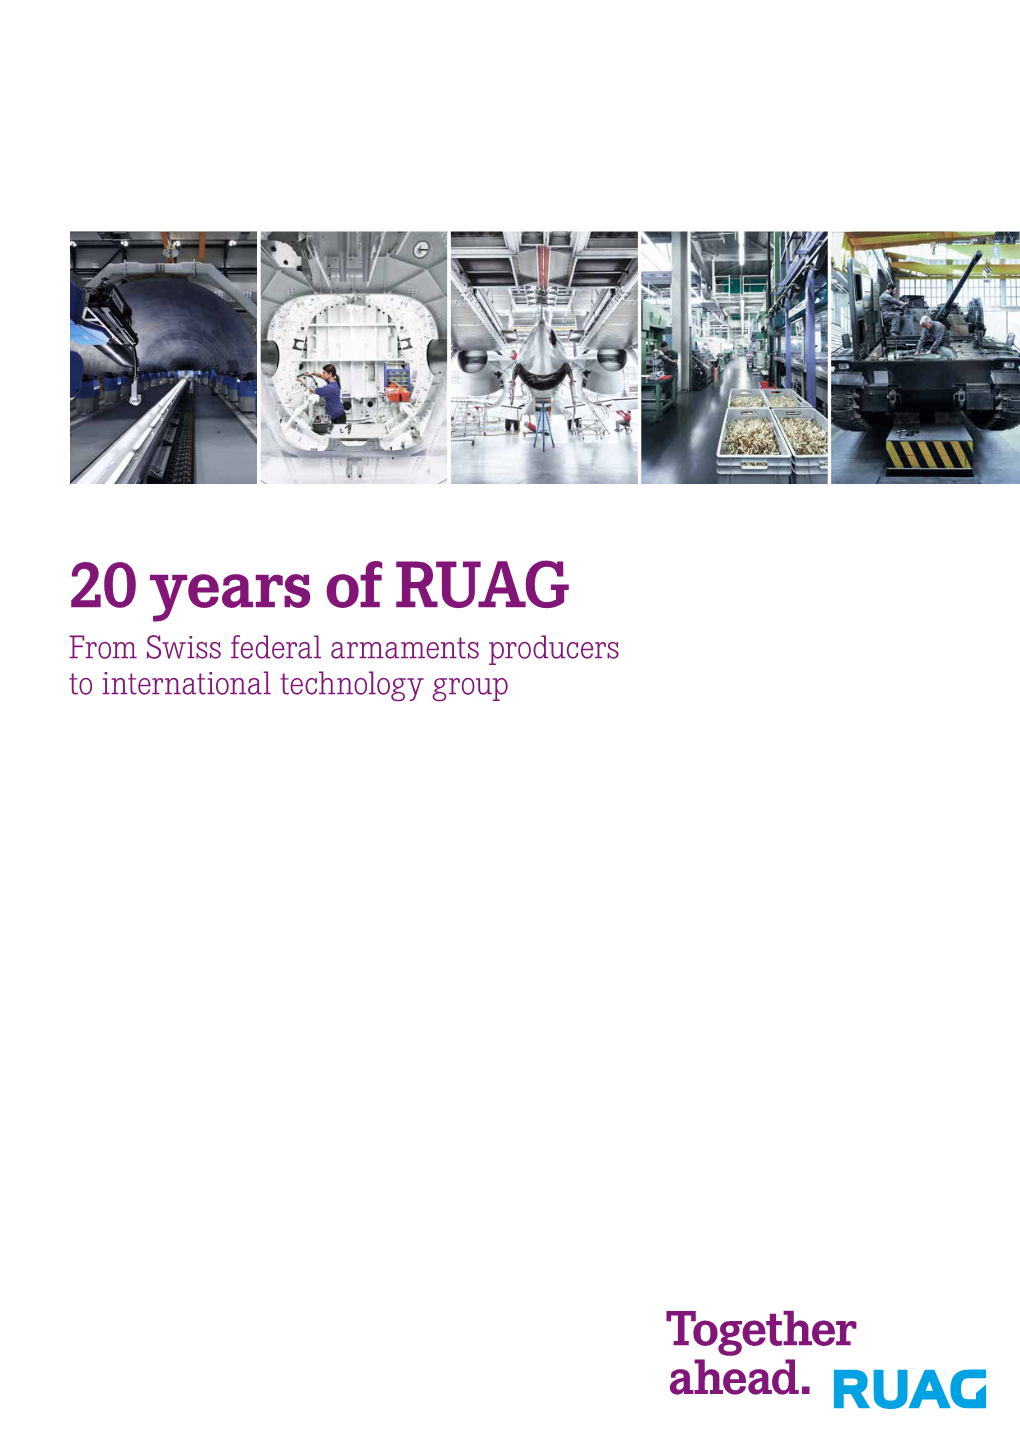 20 Years of RUAG from Swiss Federal Armaments Producers to International Technology Group